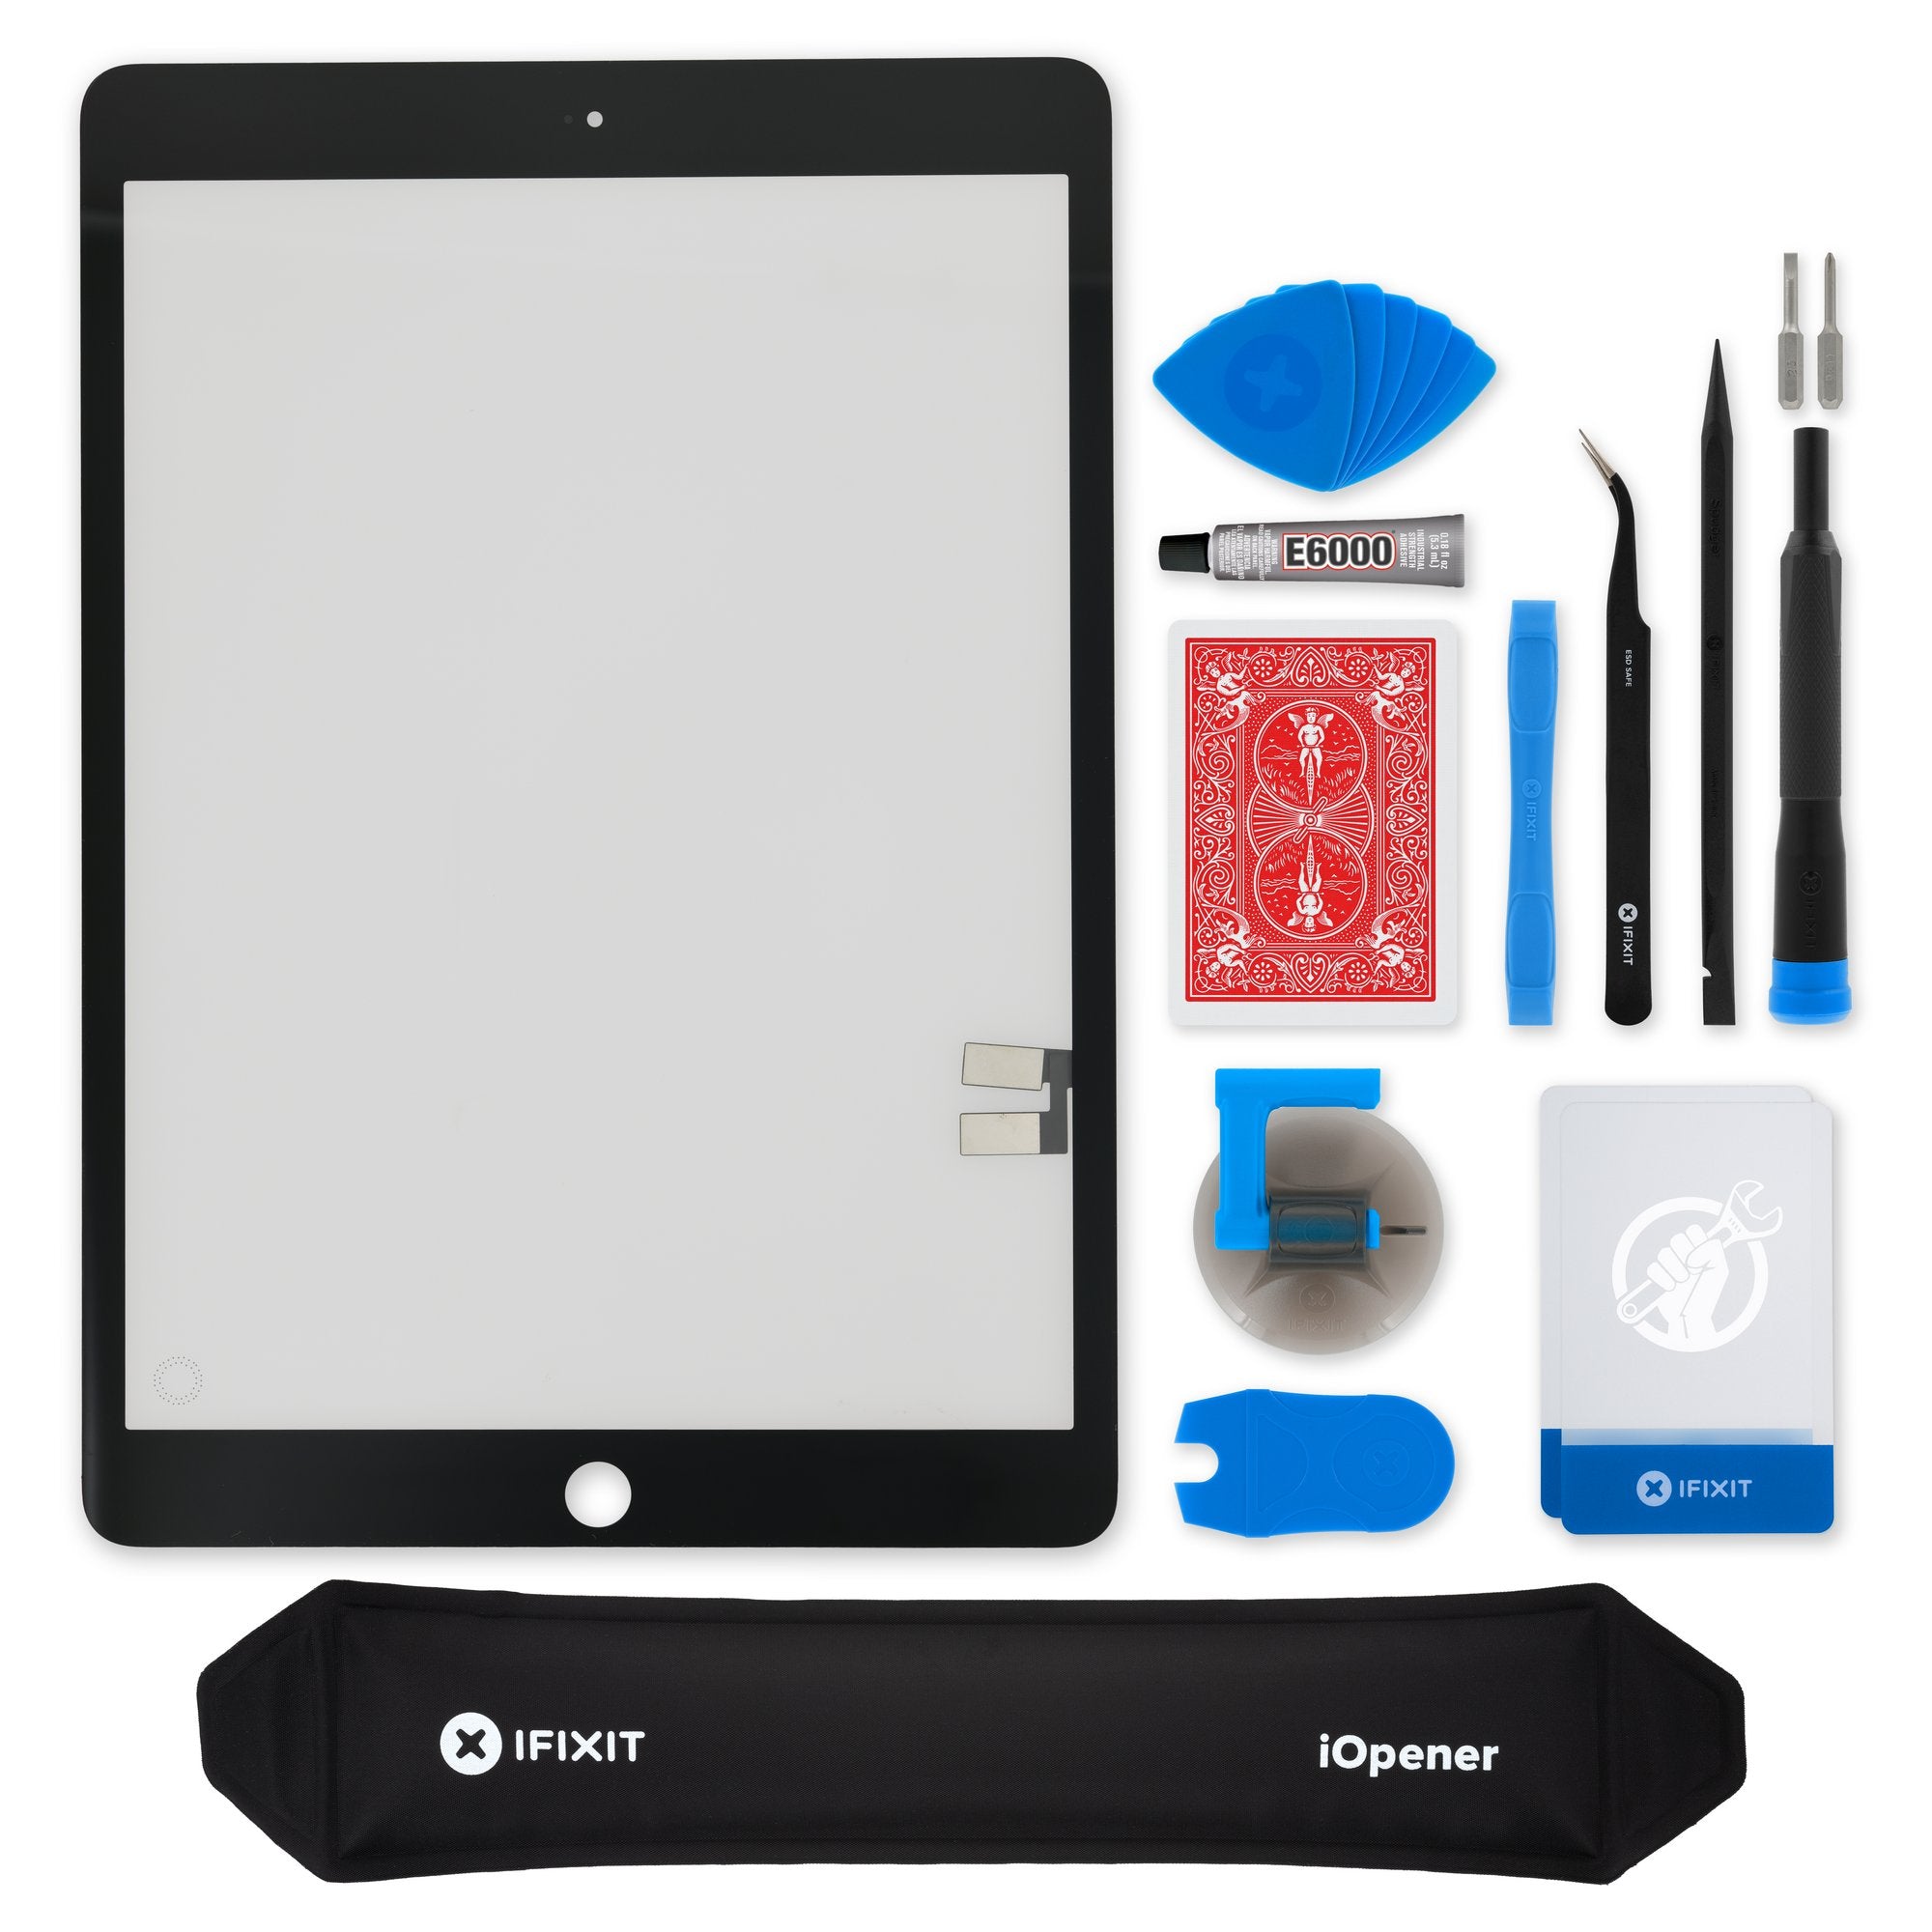 iPad AIR 2 WI-FI Screen and Glass Digitizer Replacement and Repair